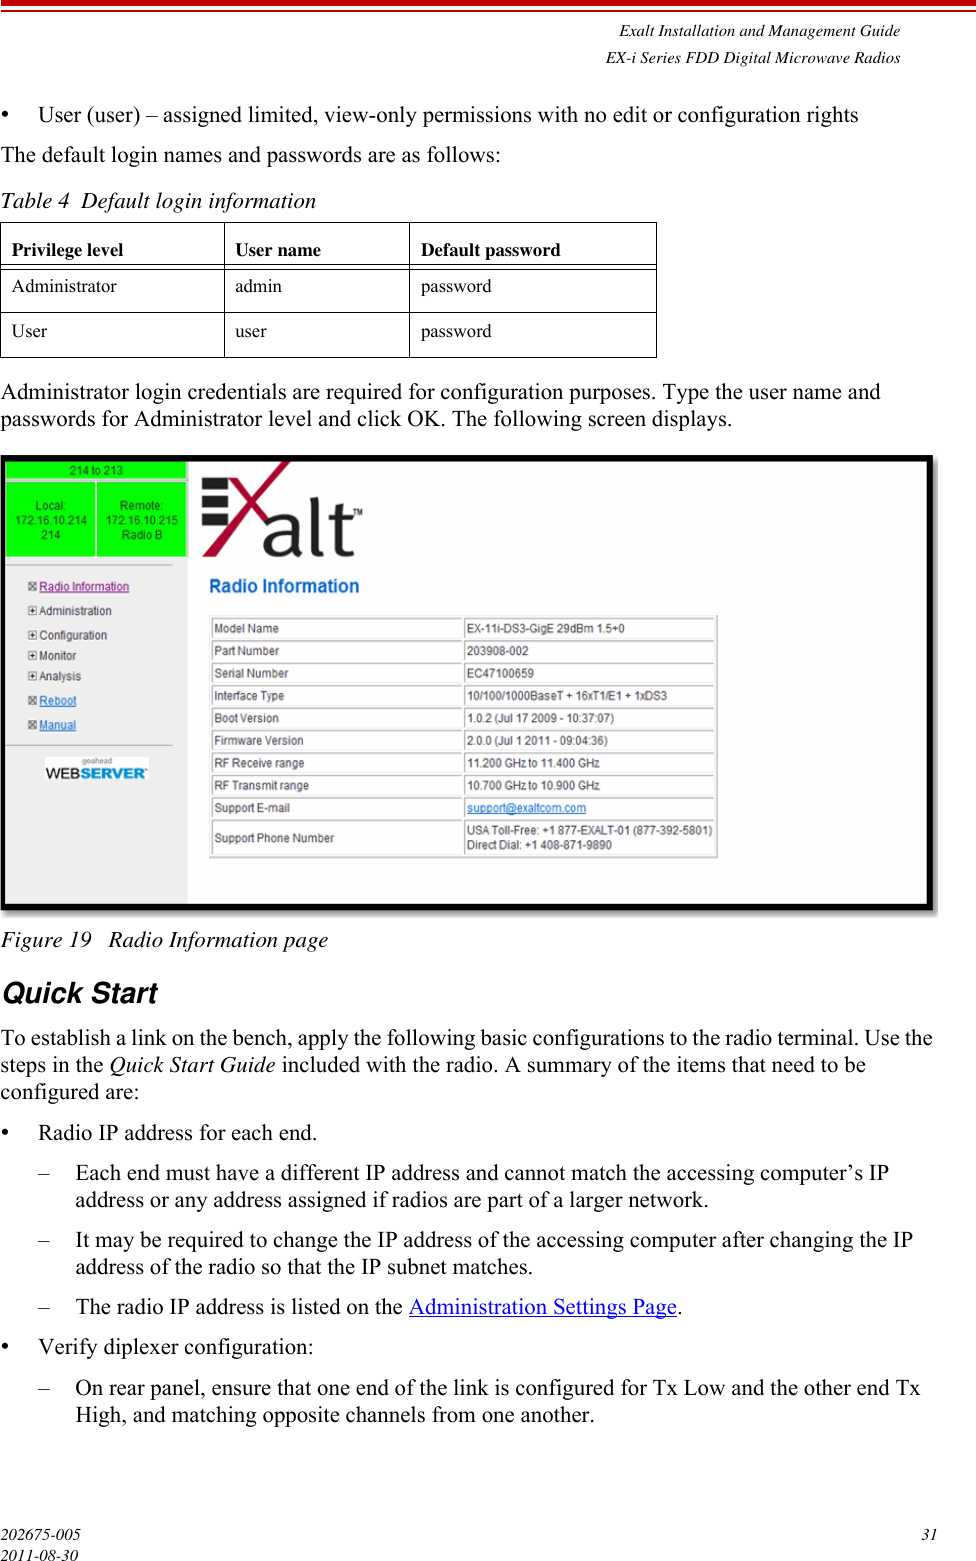 Exalt Installation and Management GuideEX-i Series FDD Digital Microwave Radios202675-005 312011-08-30•User (user) – assigned limited, view-only permissions with no edit or configuration rightsThe default login names and passwords are as follows:Administrator login credentials are required for configuration purposes. Type the user name and passwords for Administrator level and click OK. The following screen displays.Figure 19   Radio Information pageQuick StartTo establish a link on the bench, apply the following basic configurations to the radio terminal. Use the steps in the Quick Start Guide included with the radio. A summary of the items that need to be configured are:•Radio IP address for each end. – Each end must have a different IP address and cannot match the accessing computer’s IP address or any address assigned if radios are part of a larger network.– It may be required to change the IP address of the accessing computer after changing the IP address of the radio so that the IP subnet matches.– The radio IP address is listed on the Administration Settings Page.•Verify diplexer configuration:– On rear panel, ensure that one end of the link is configured for Tx Low and the other end Tx High, and matching opposite channels from one another.Table 4  Default login informationPrivilege level User name Default passwordAdministrator admin passwordUser user password